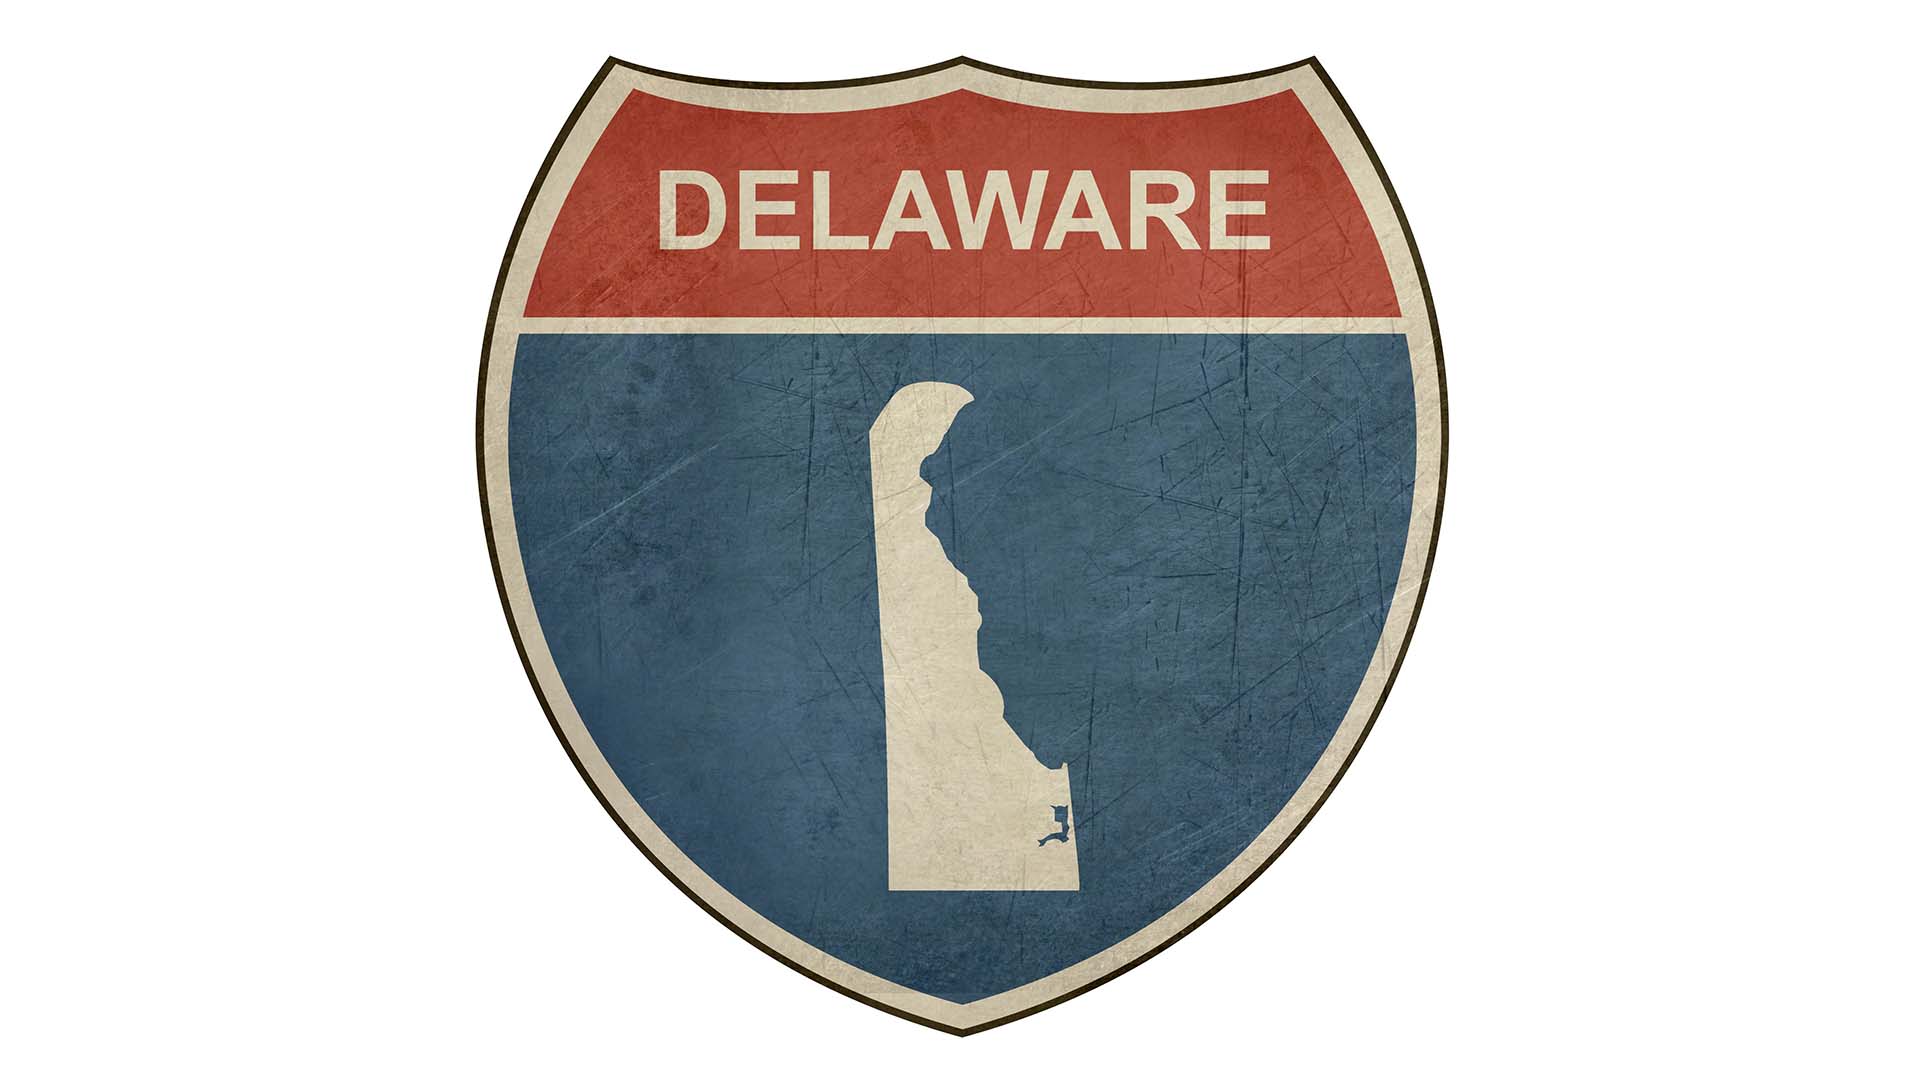 Delaware state road sign